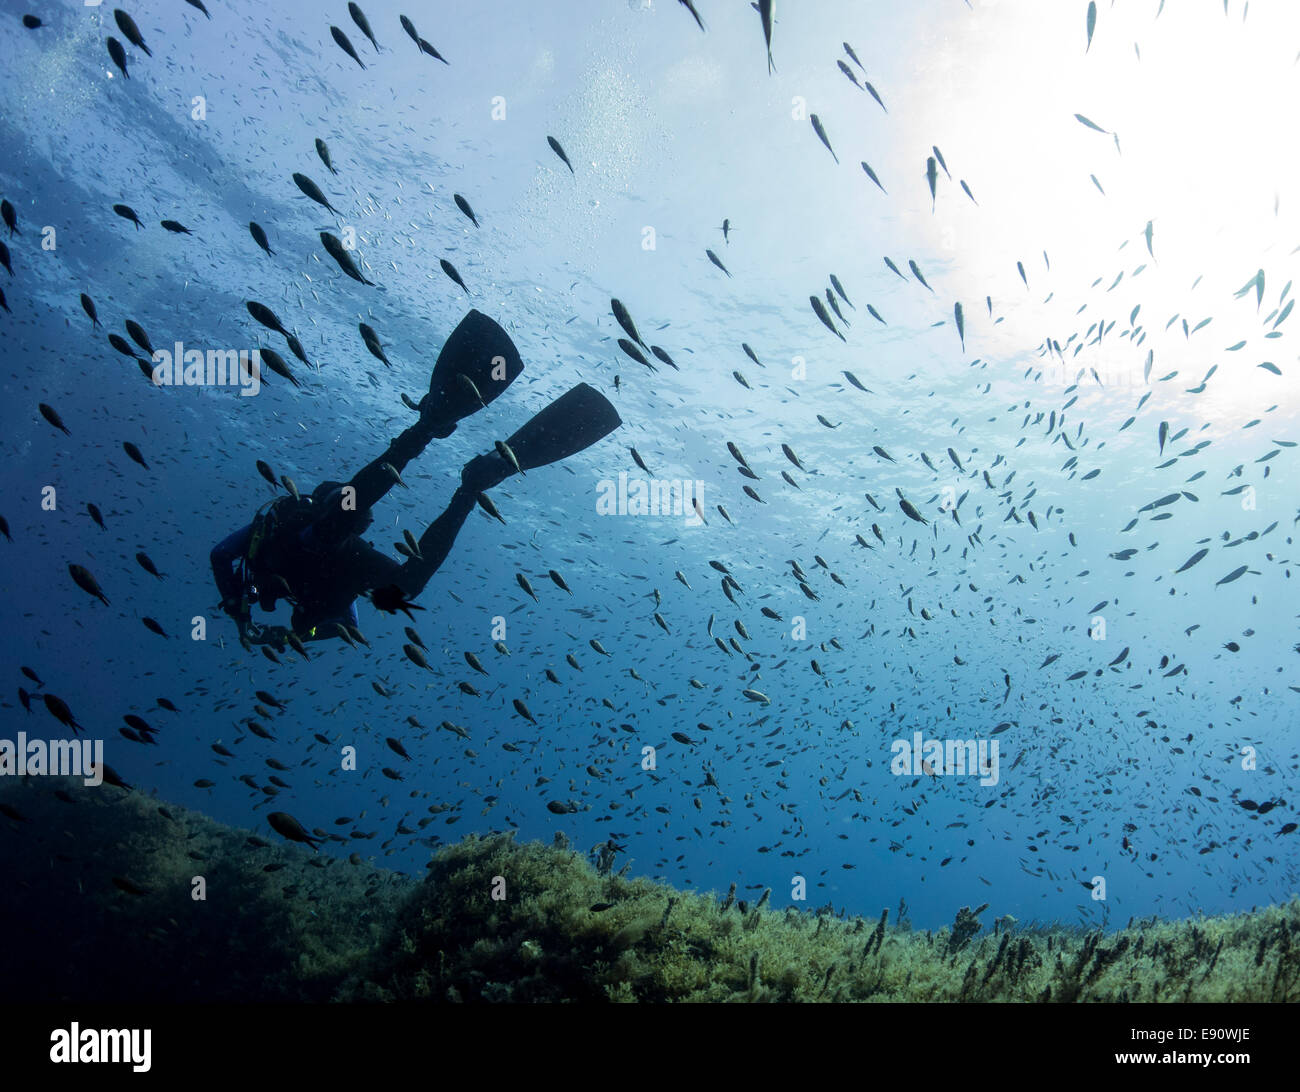 Diver within a swarm of small fishes in the Mediterranean Sea at Lantern Point in Comino, Malta. Stock Photo